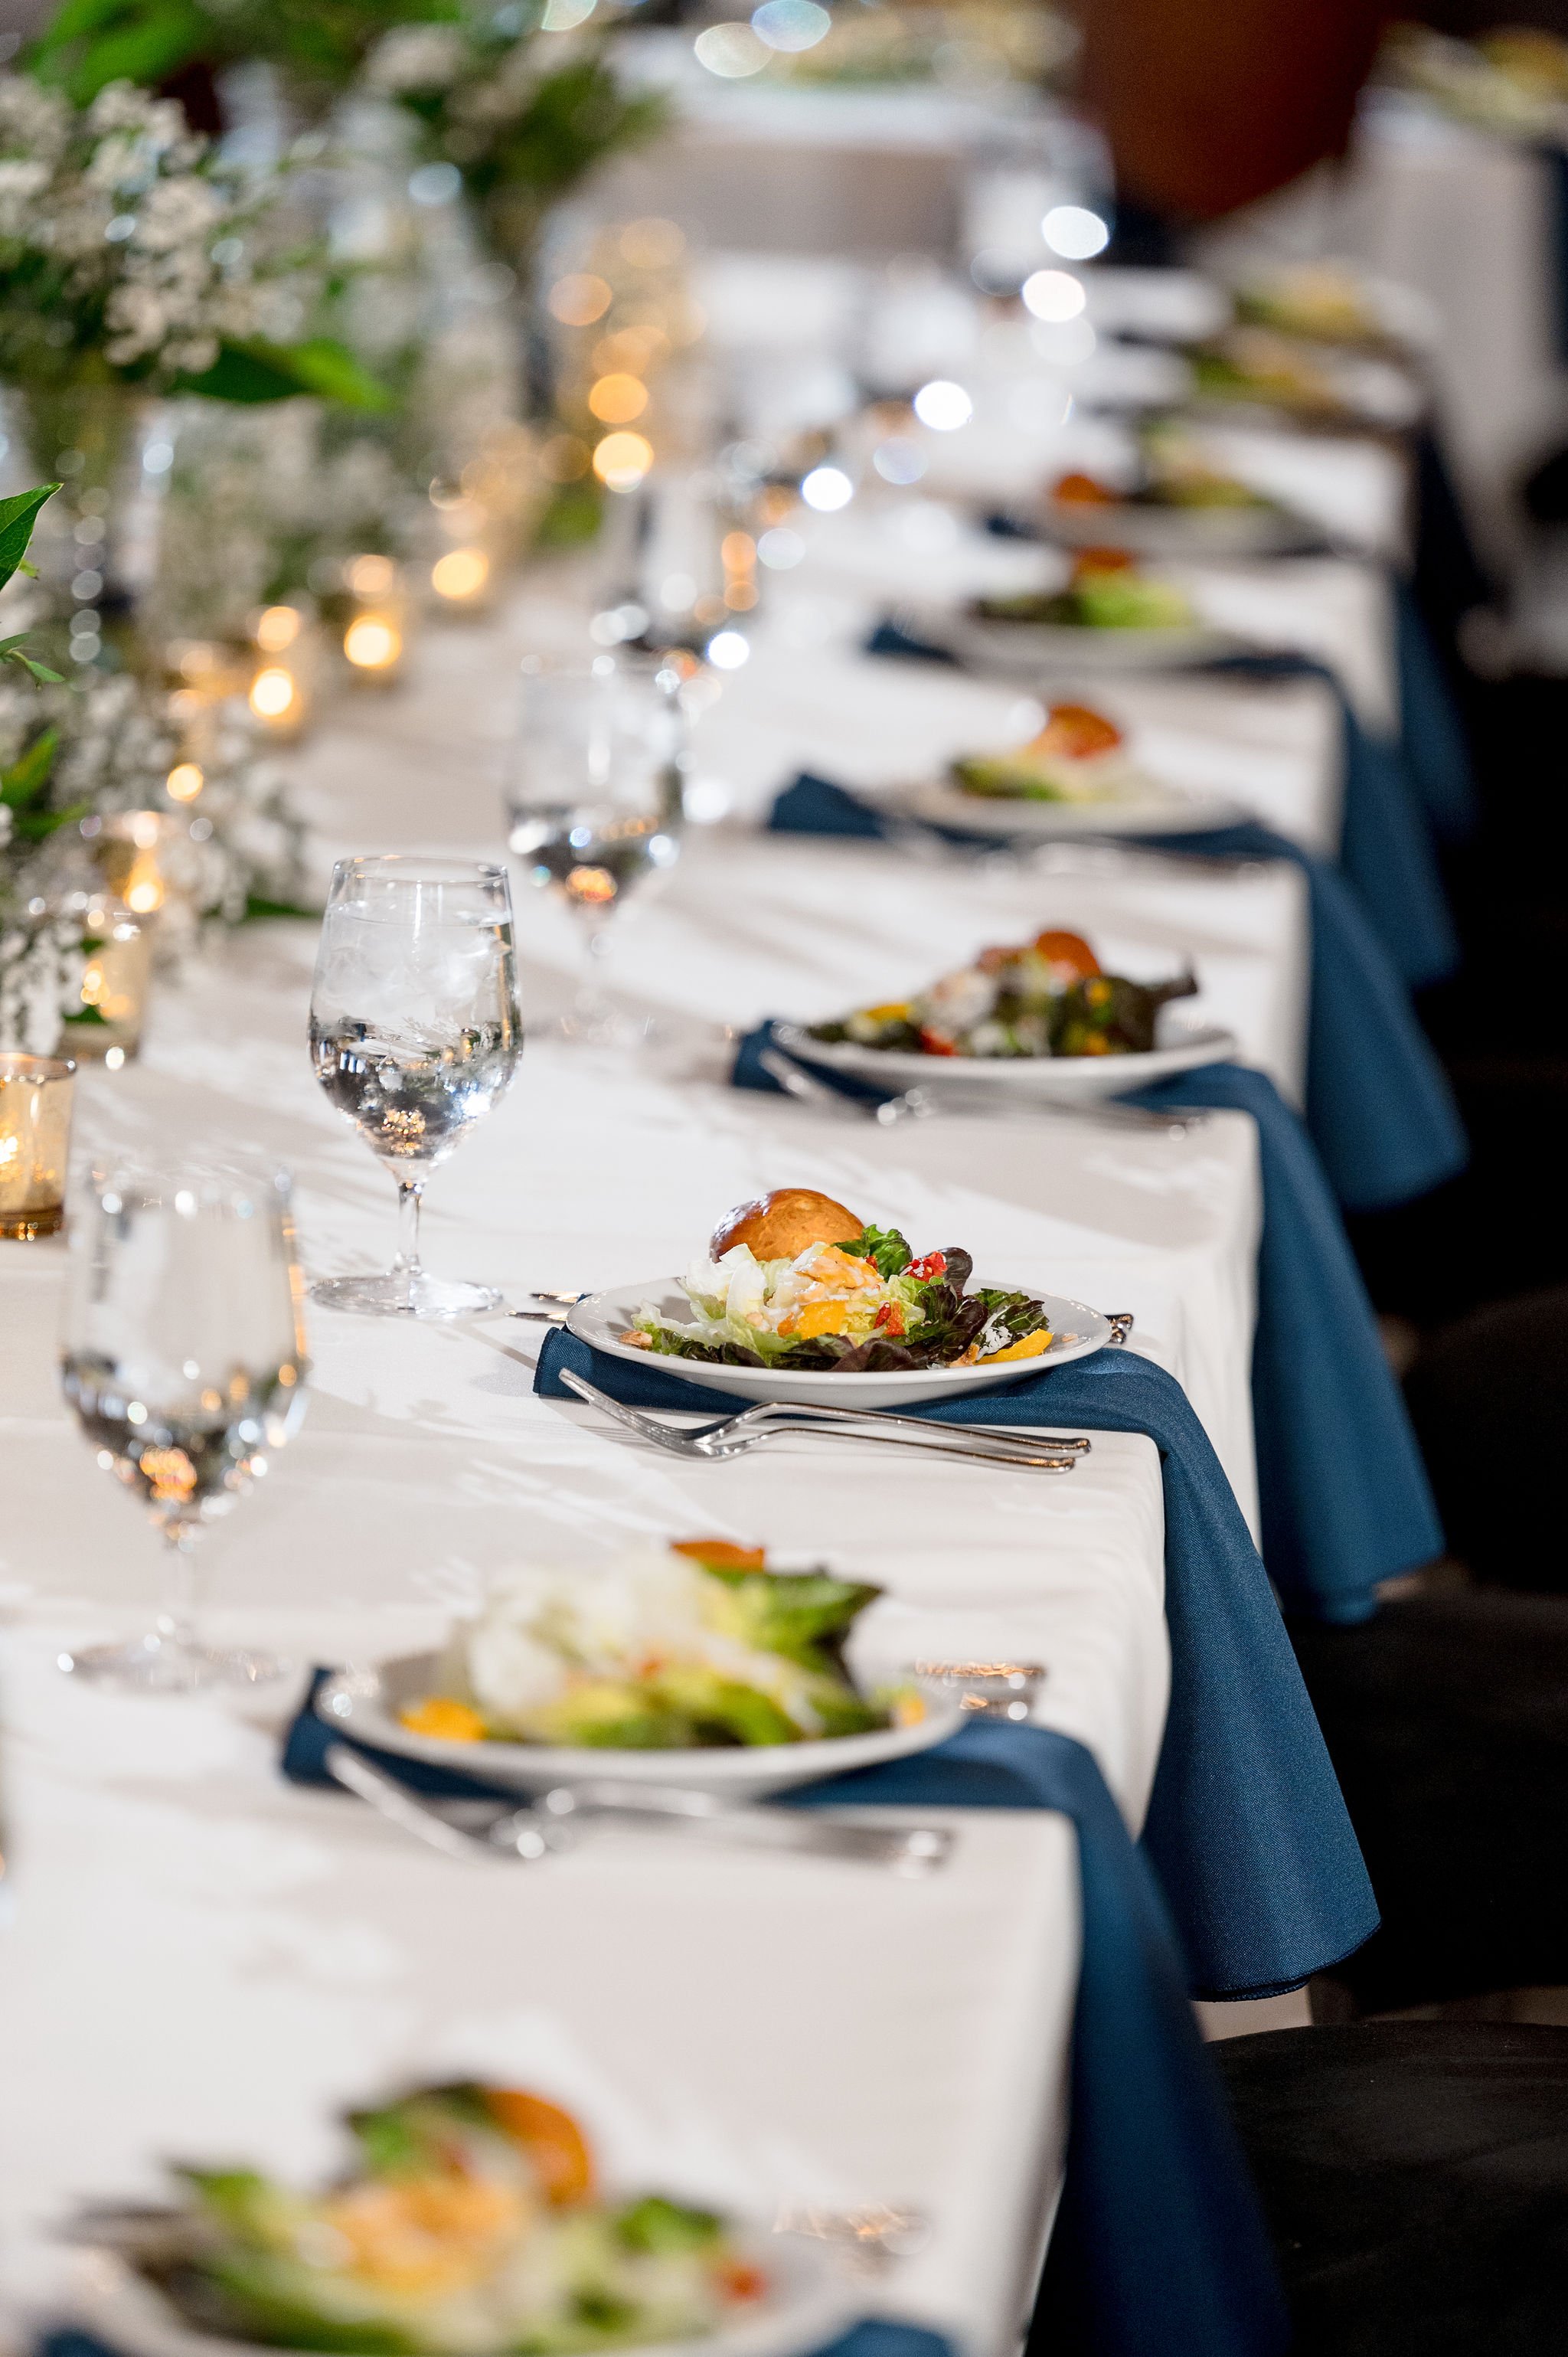  A long white linen table is set for salad service. Each place setting has a glass of water, a blue napkin, and flatware.  